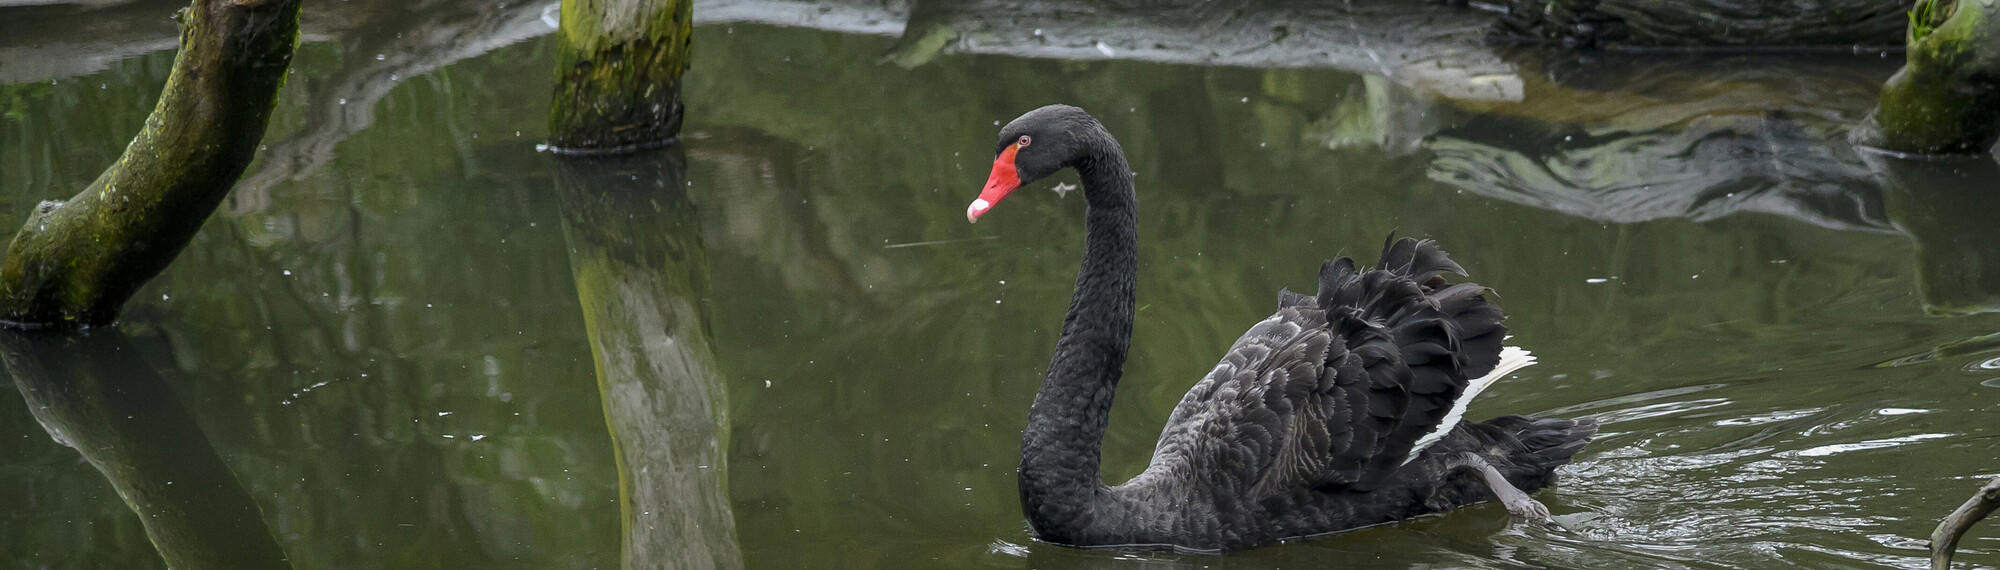 Black Swan Swimming To Left Of Frame in the Wetlands at Healesville Sanctuary